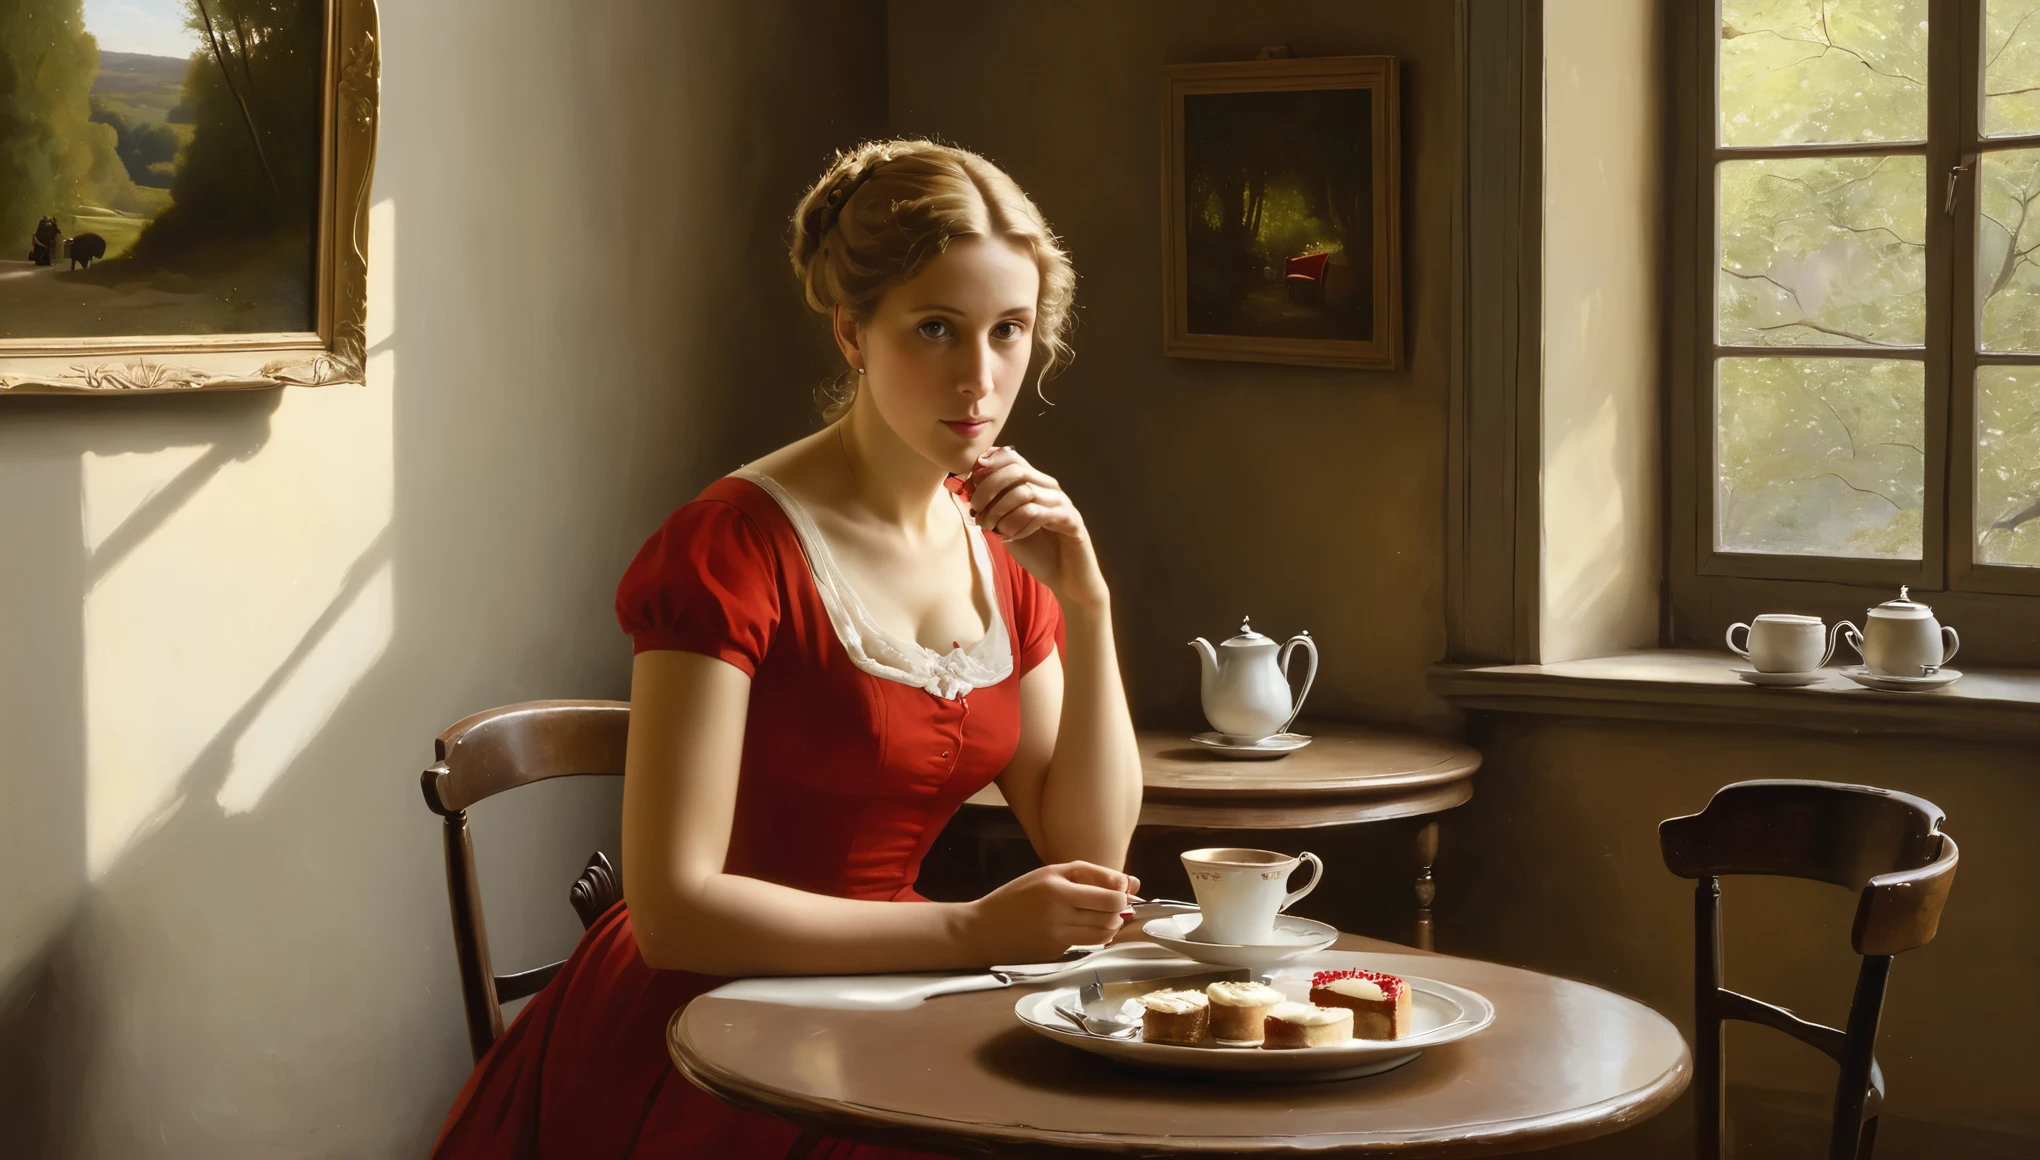 An oil painting in the style of Camille Corot portrays a 50-year woman in a short, fitted red dress with short, sparse, light curly hair drinking hot tea. On the table, there is a plate with salad and a small red cheesecake. She is contemplating divorce from her husband. In the background, the walls of a cozy Buenos Aires very small cafe adorned with paintings by the artist Camille Corot, with morning light streaming in through the window.